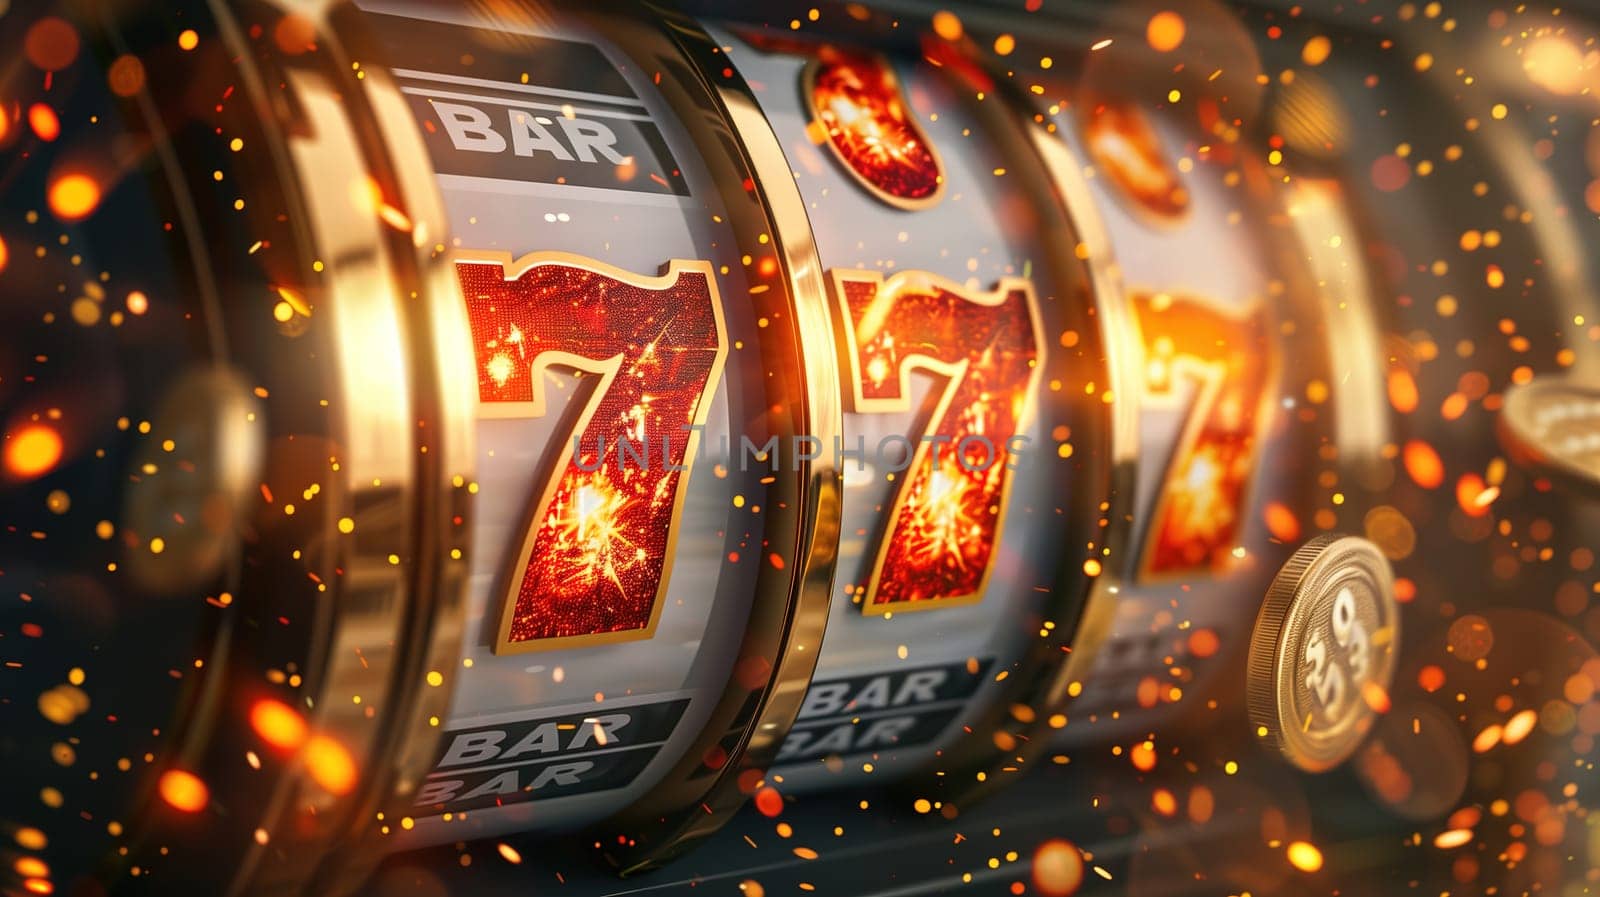 Close-Up View of a Slot Machine Display Showing Lucky Sevens at a Casino by TRMK